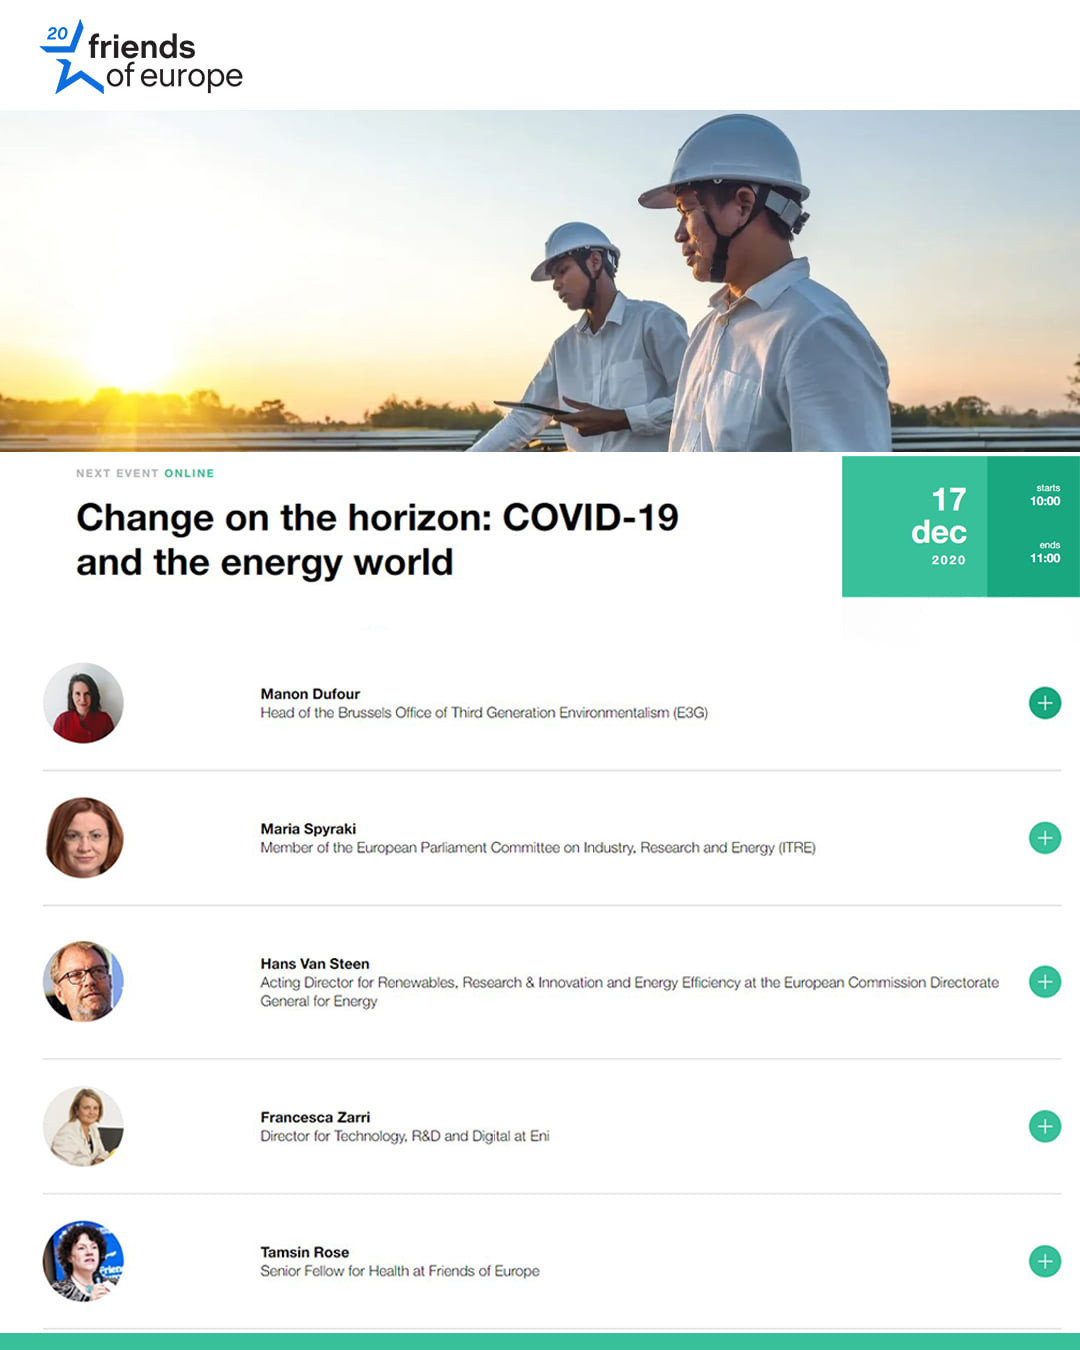 Change on the horizon: COVID-19 and the energy world